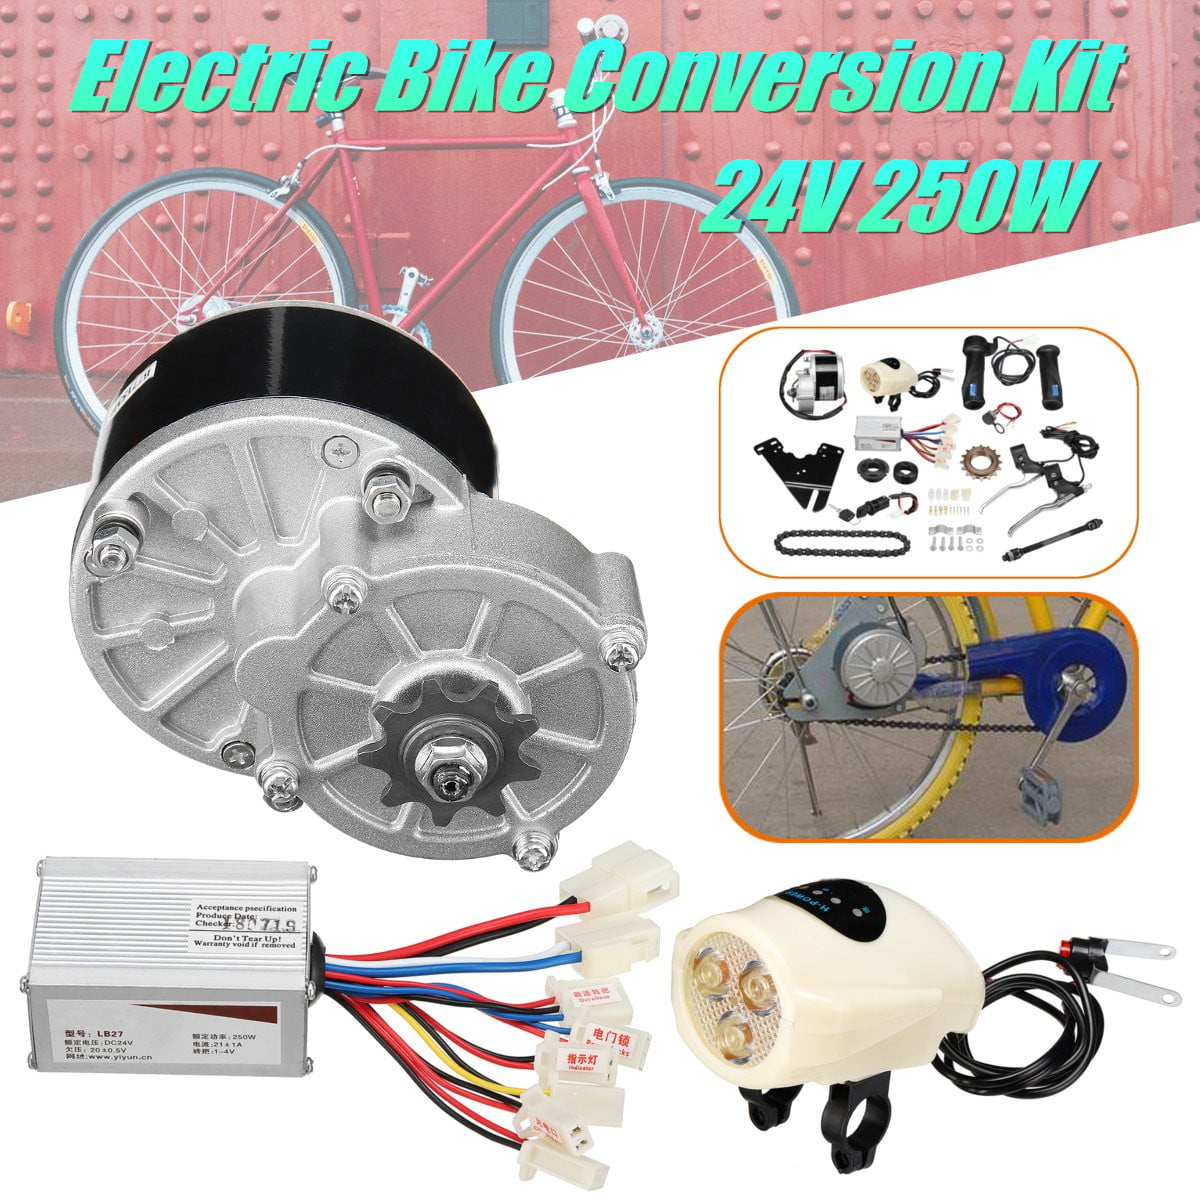 Yescom 26 Inch Electric Bicycle Motor Kit for sale online 